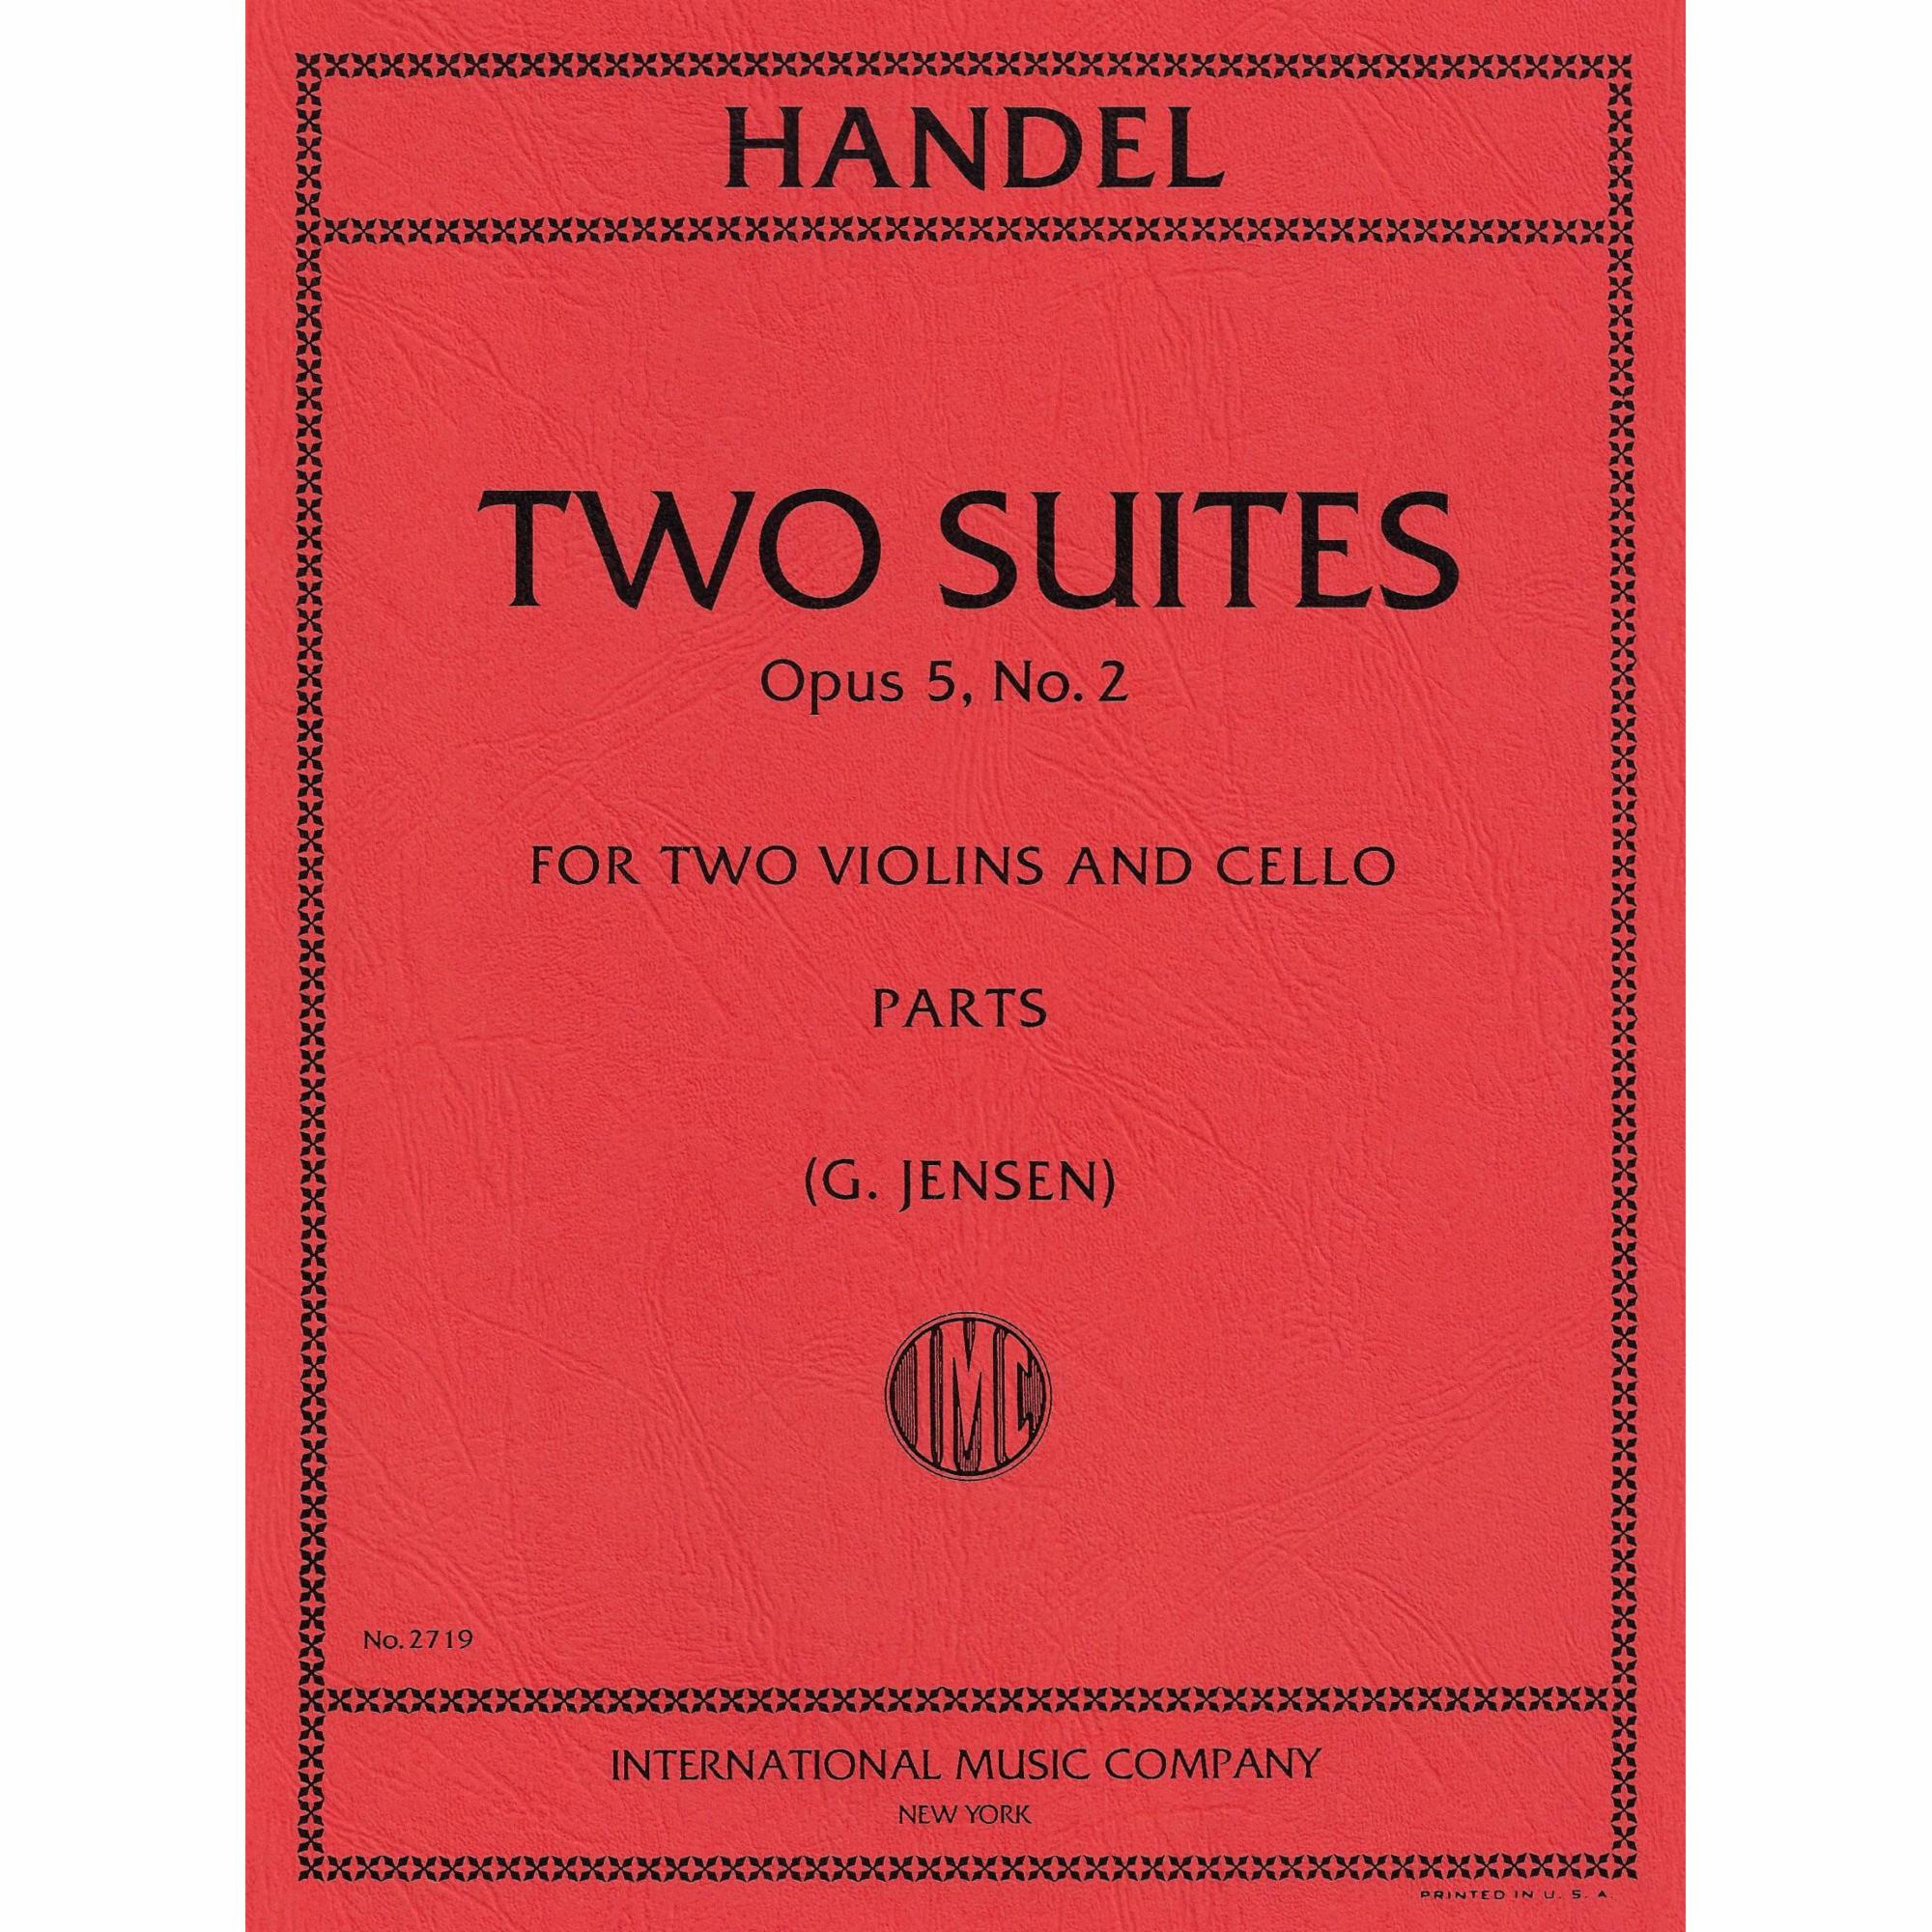 Handel -- Two Suites, Op. 5, No. 2 for Two Violins and Cello